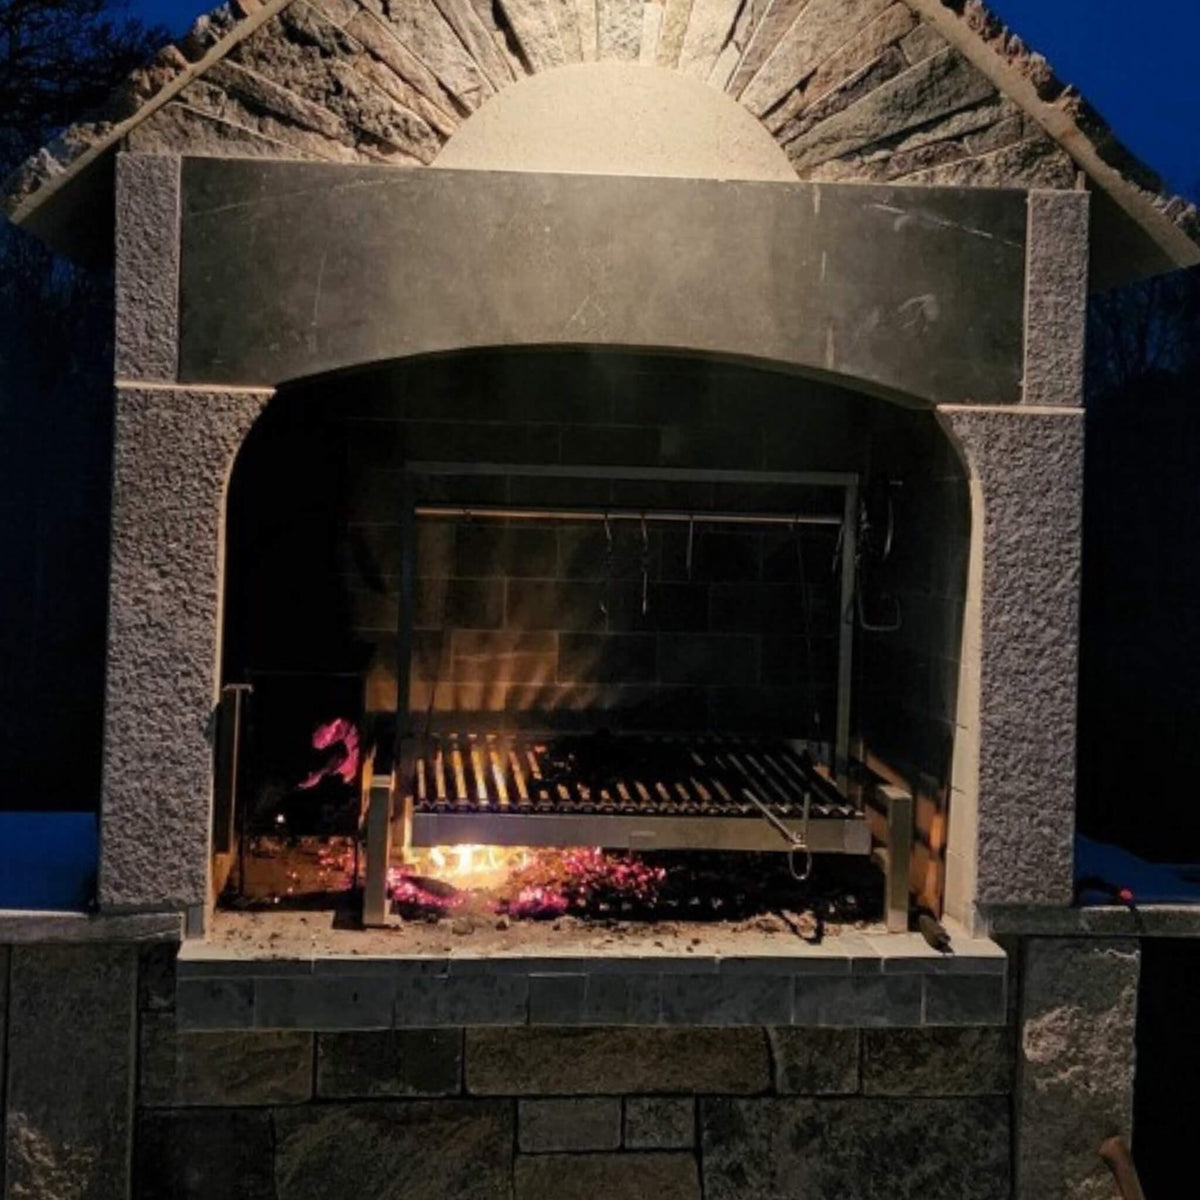 Tagwood BBQ Insert Style Argentine Santa Maria Wood Fire &amp; Charcoal Gaucho Grill without firebricks